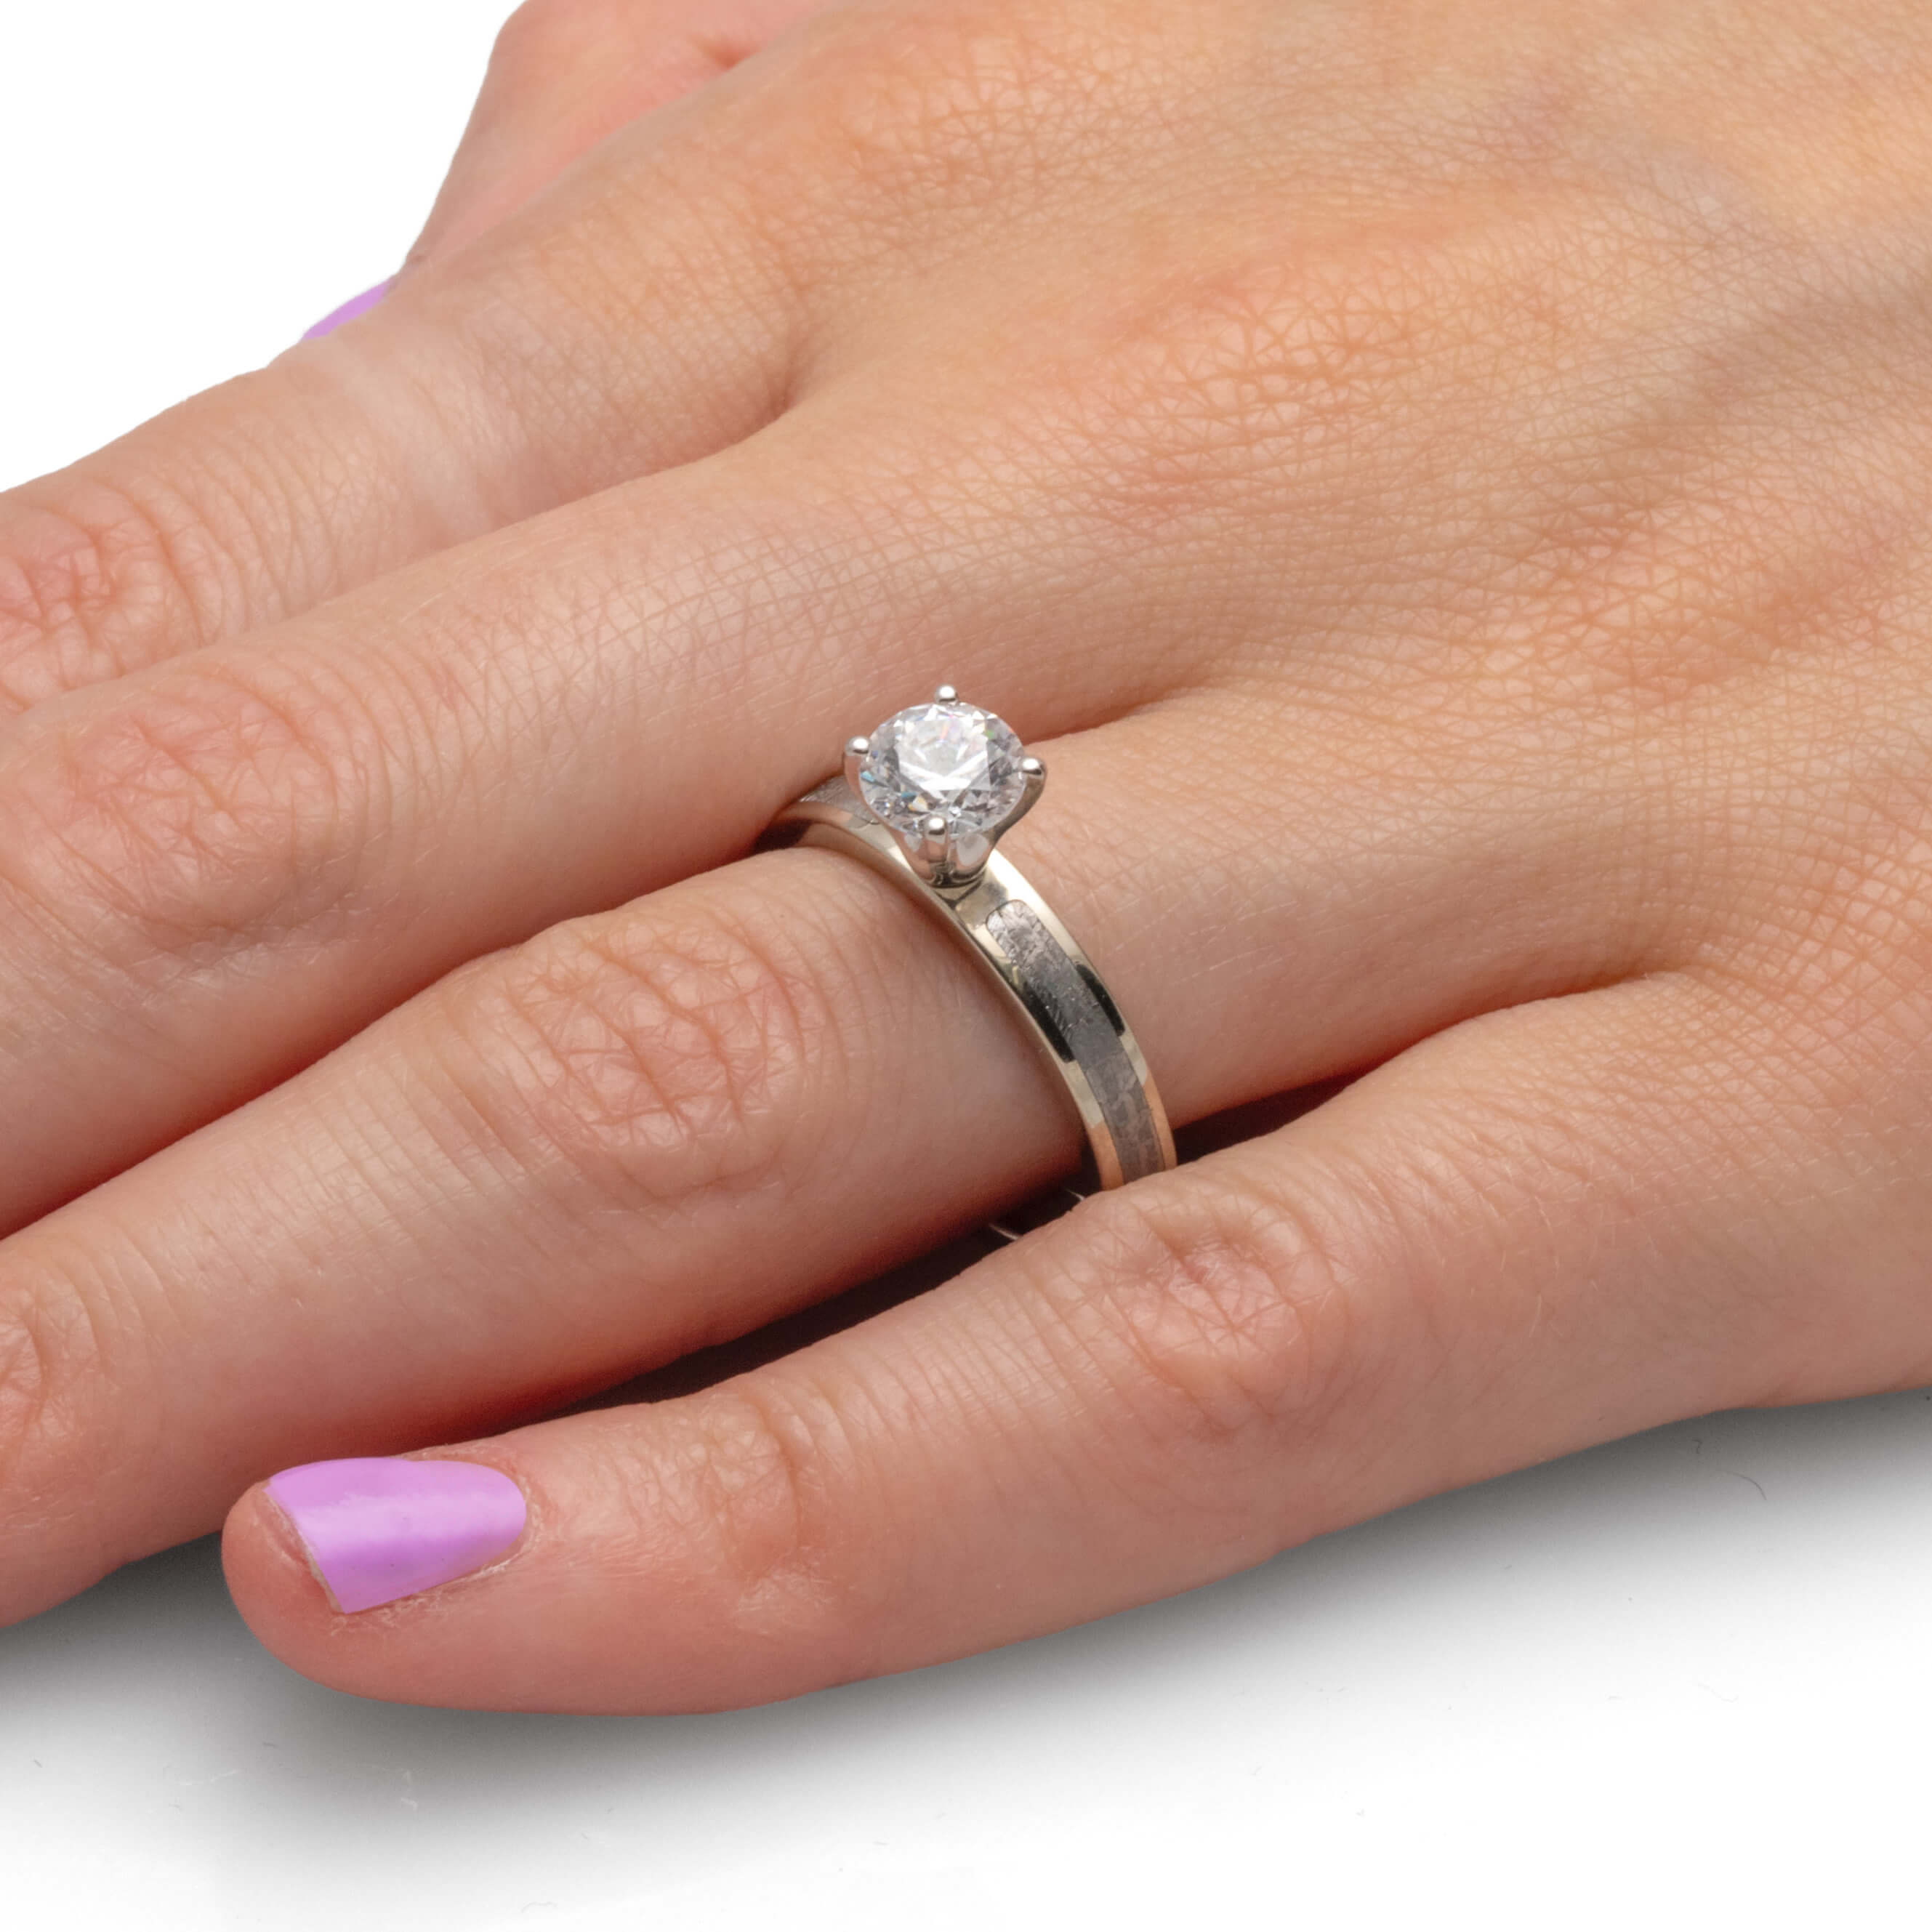 Hand wearing a 1-carat diamond ring with a simple silver band.